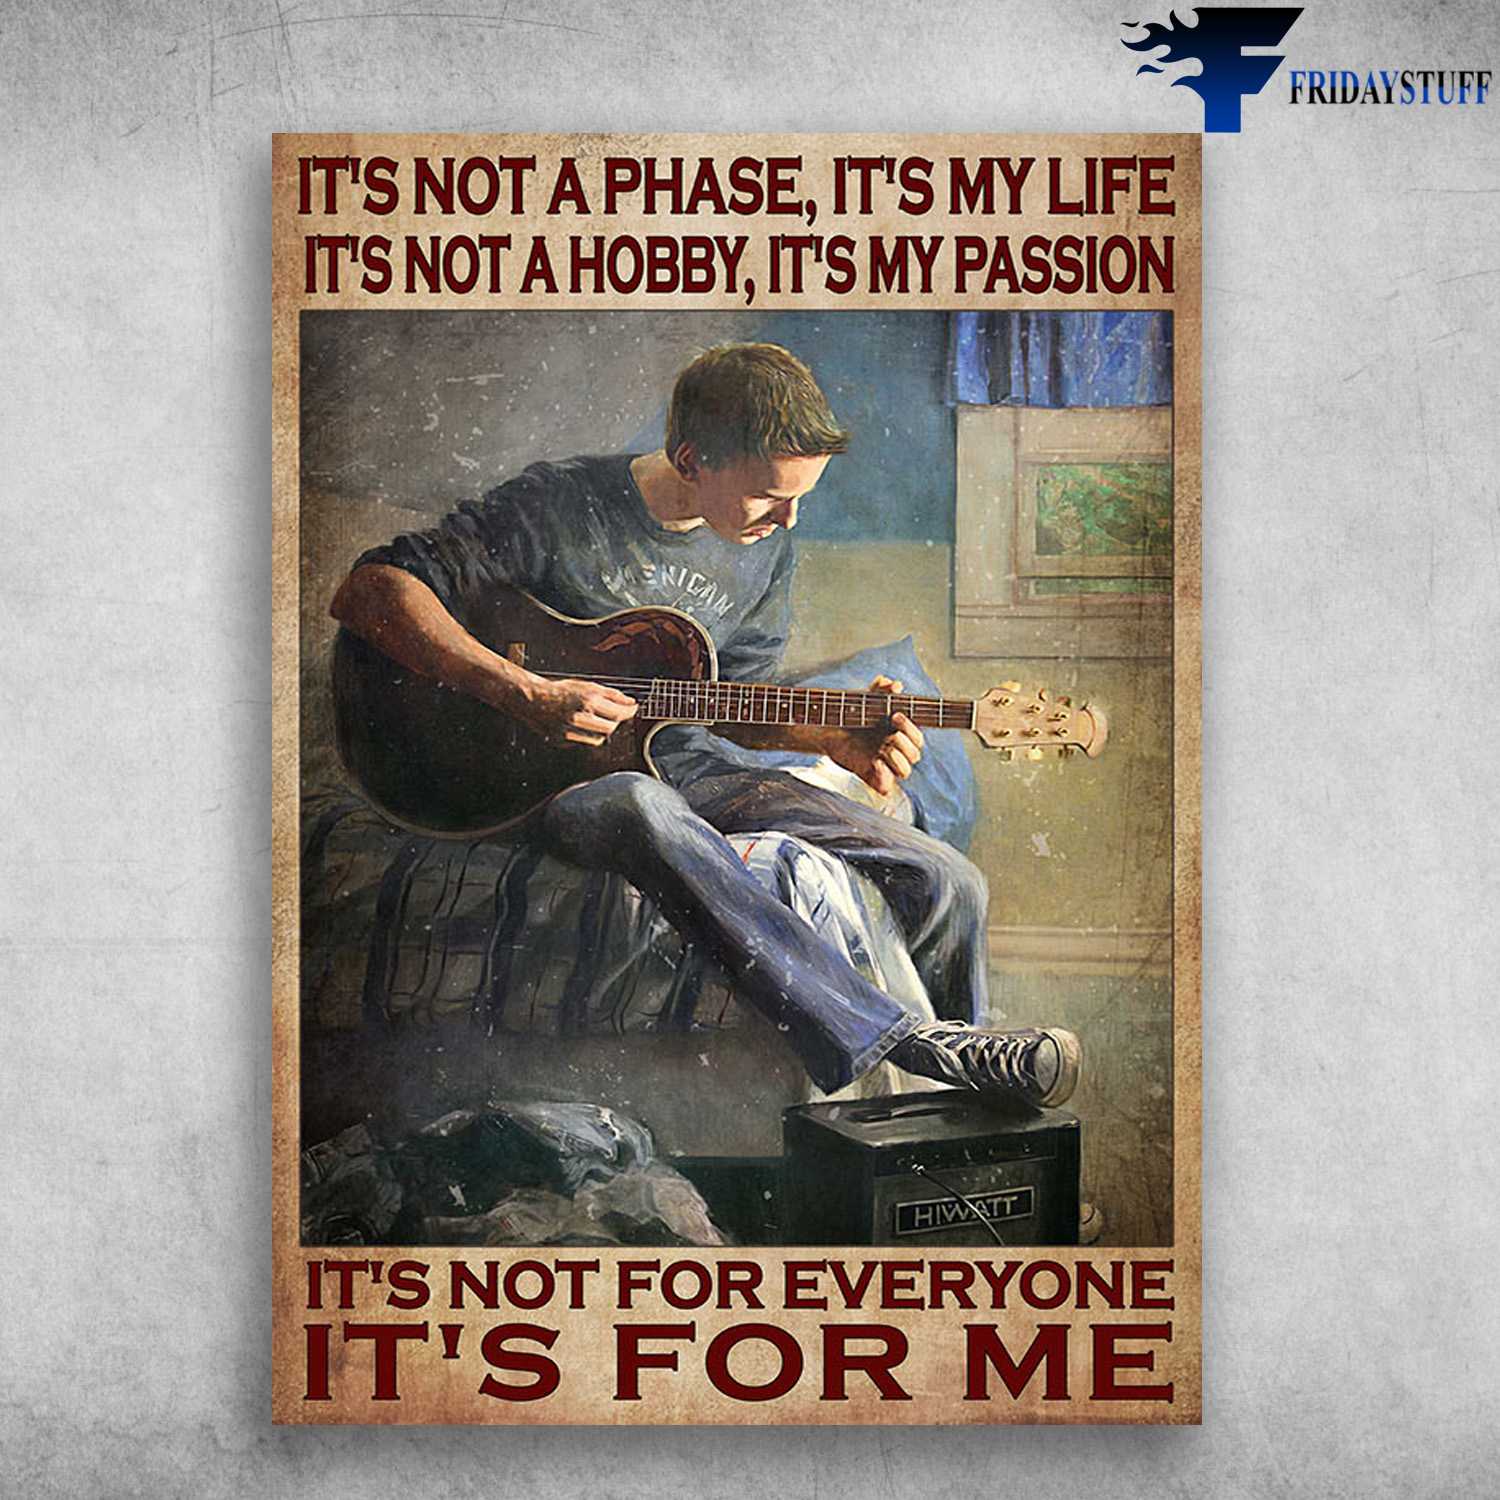 Guitar Boy, Guitar Music Lover - It's Not A Phase, It's My Life, It's Not A Hobby, It's My Passion, It's Not For Everyone, It's For Me